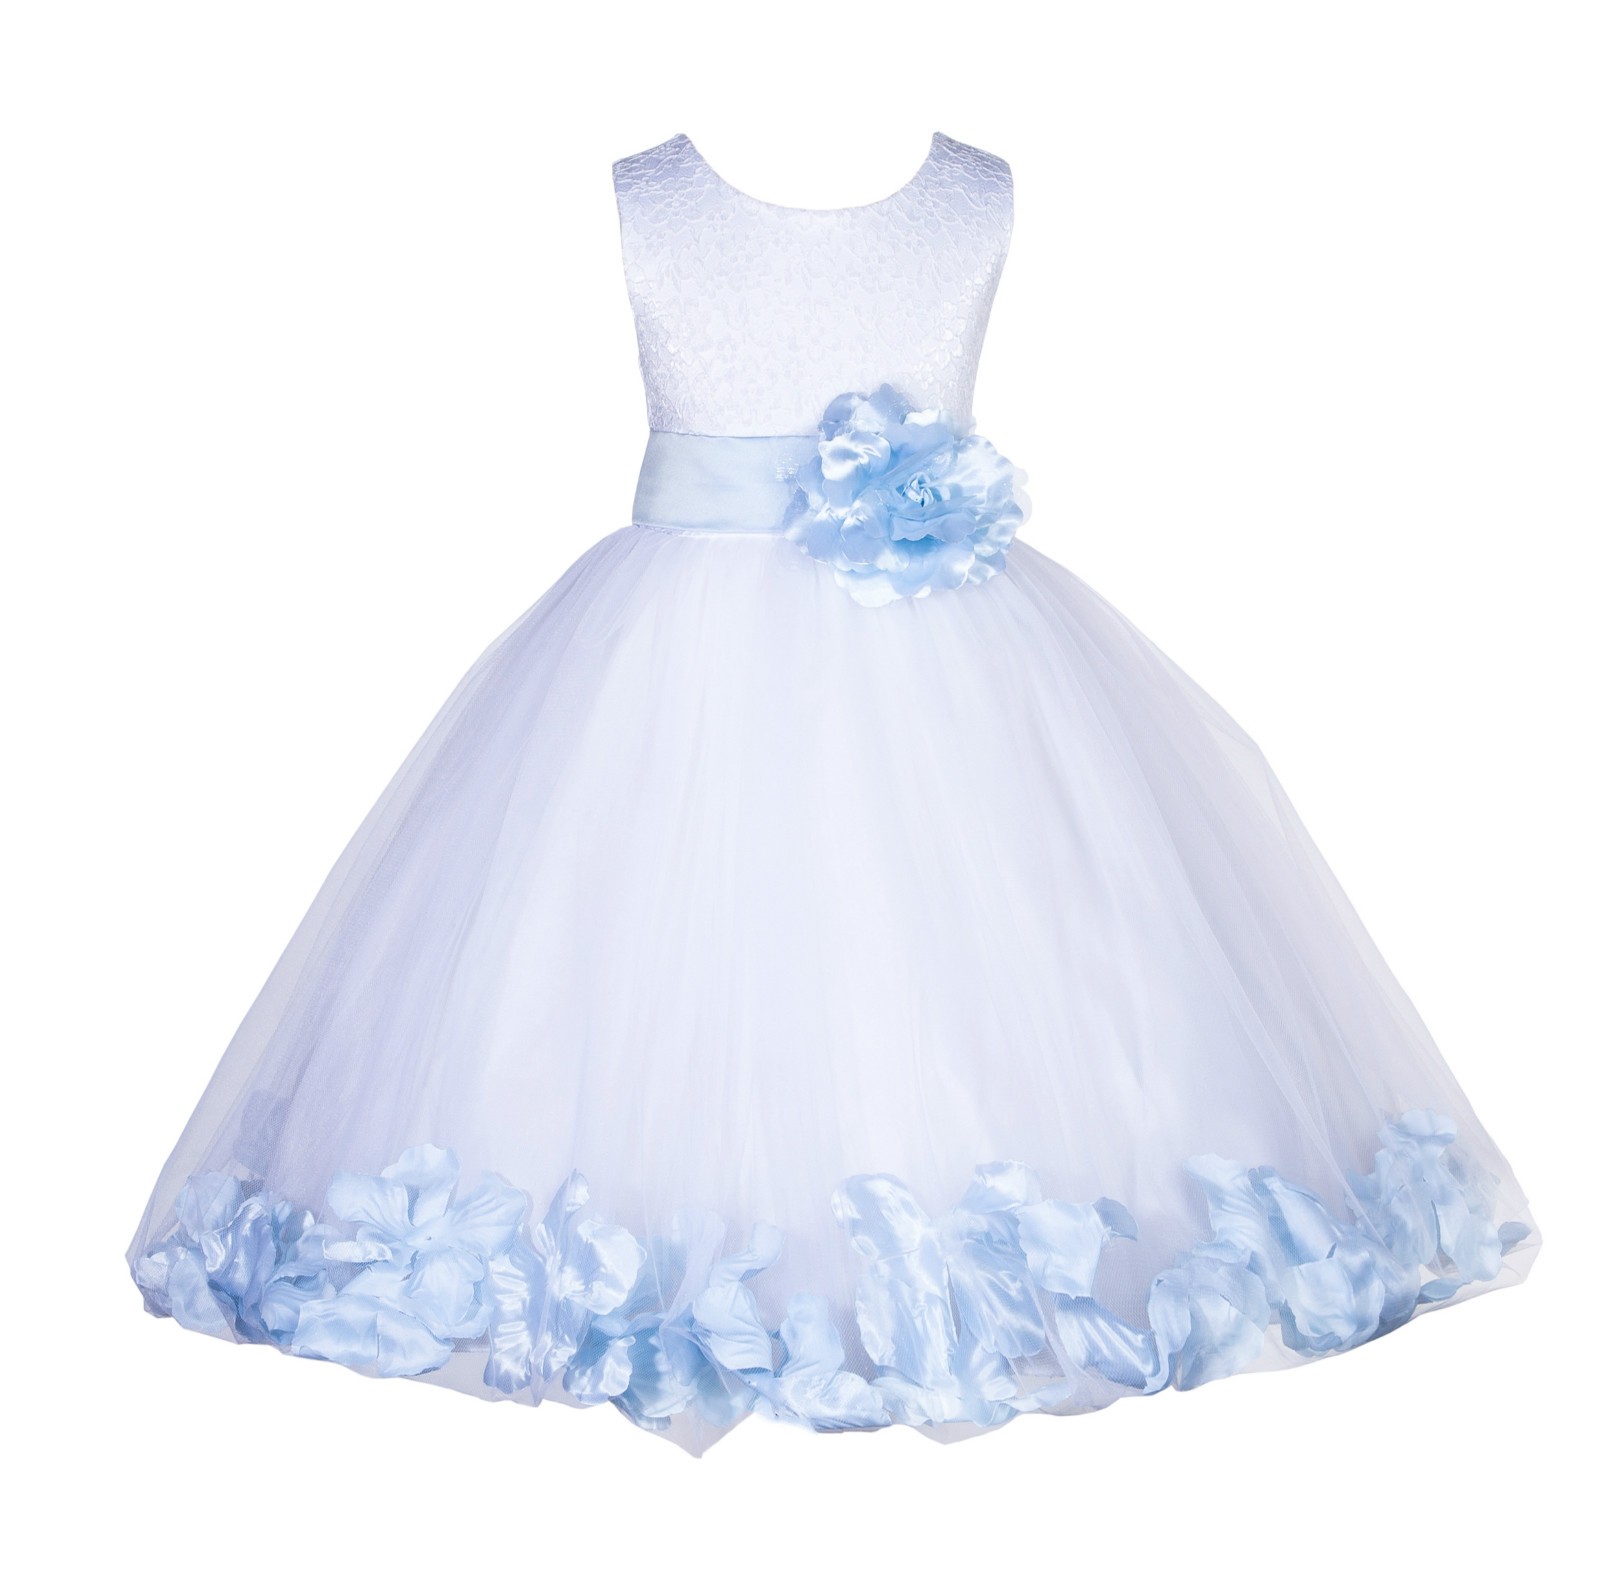 White/Ice Blue Lace Top Tulle Floral Petals Flower Girl Dress 165S